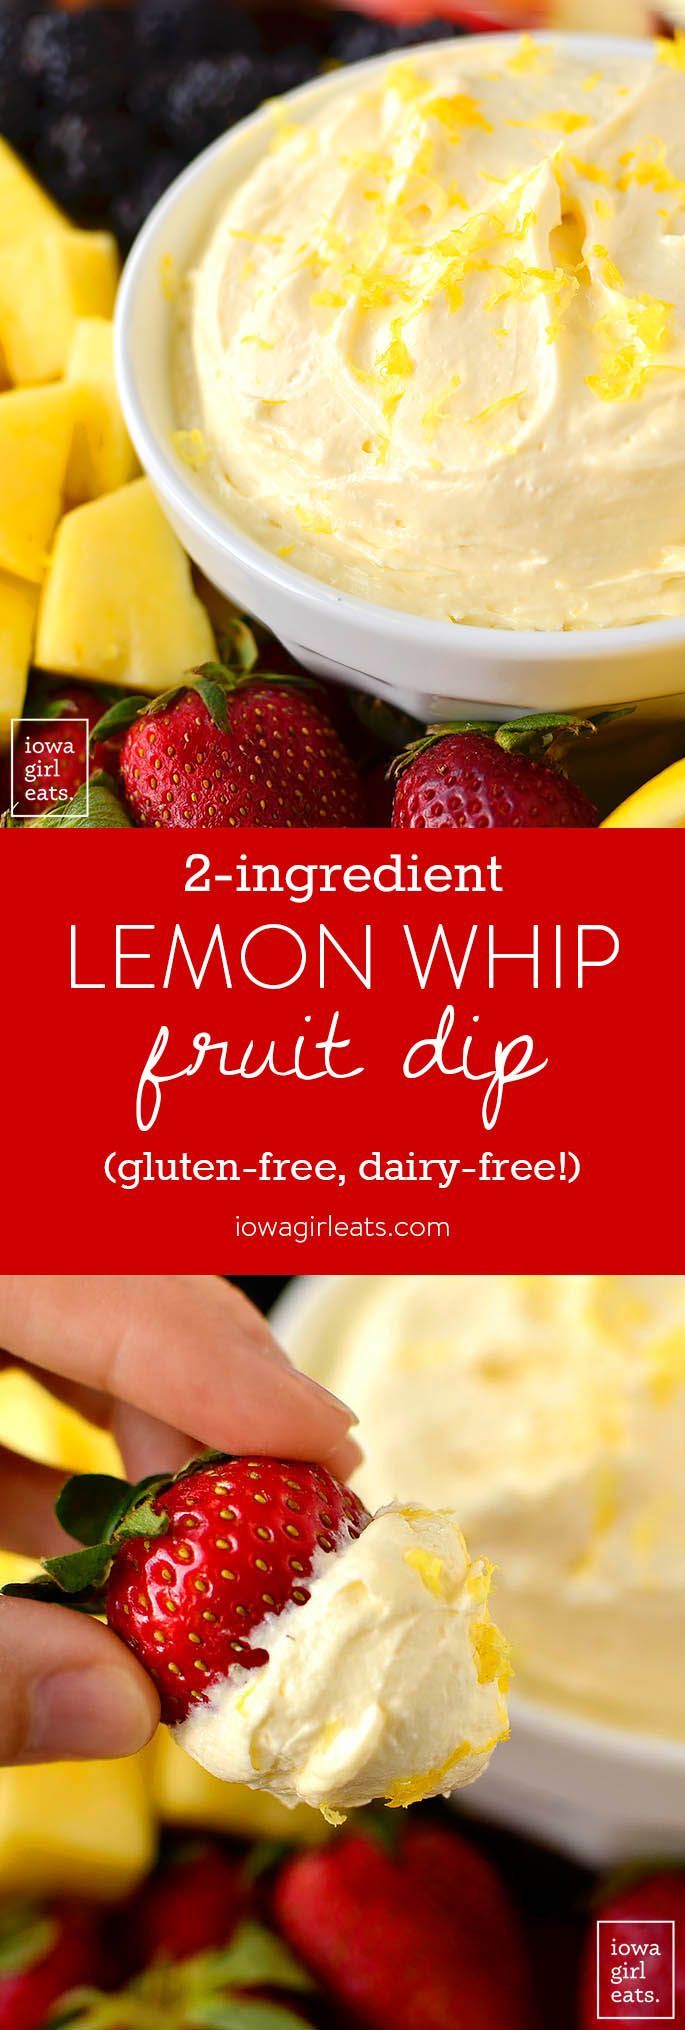 2-Ingredient Lemon Whip Fruit Dip is light and mousse-like in texture, and made with just 2 ingredients. This gluten-free,